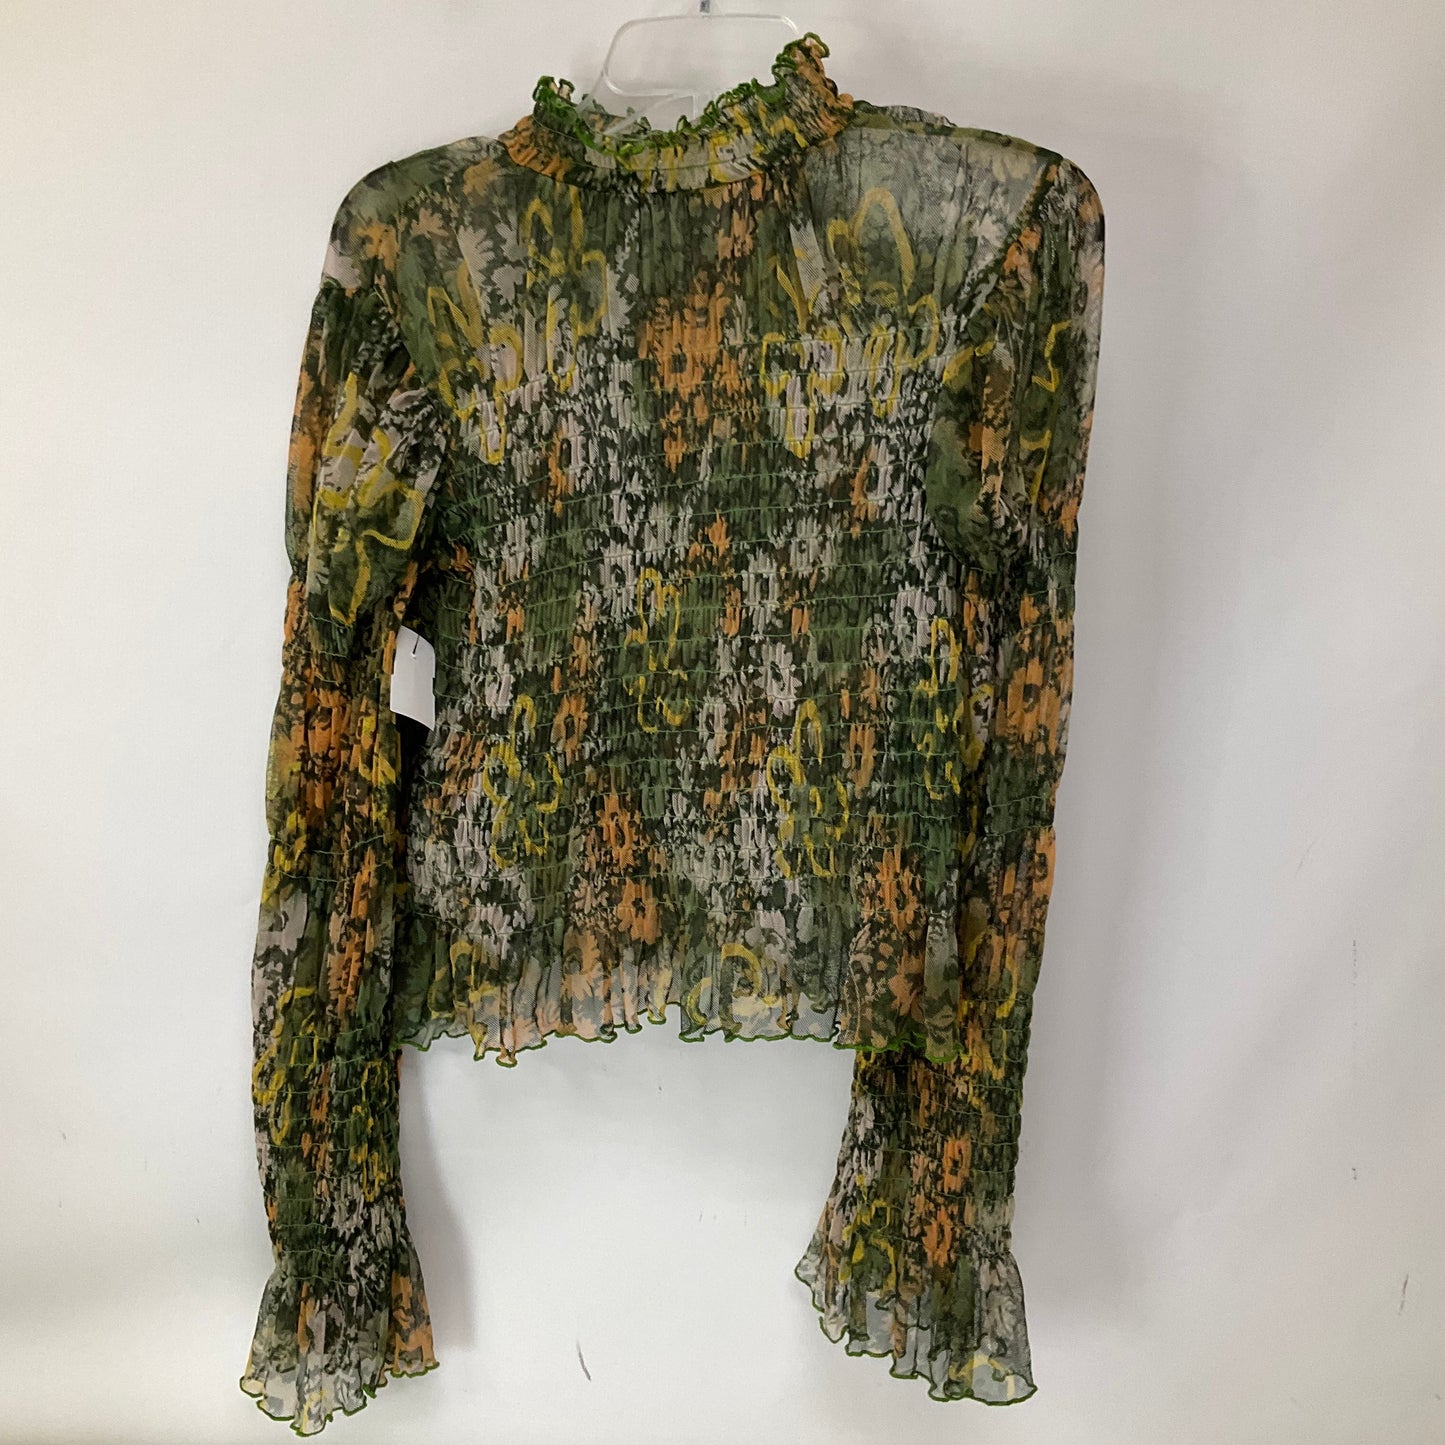 Green & Yellow Top Long Sleeve Free People, Size M